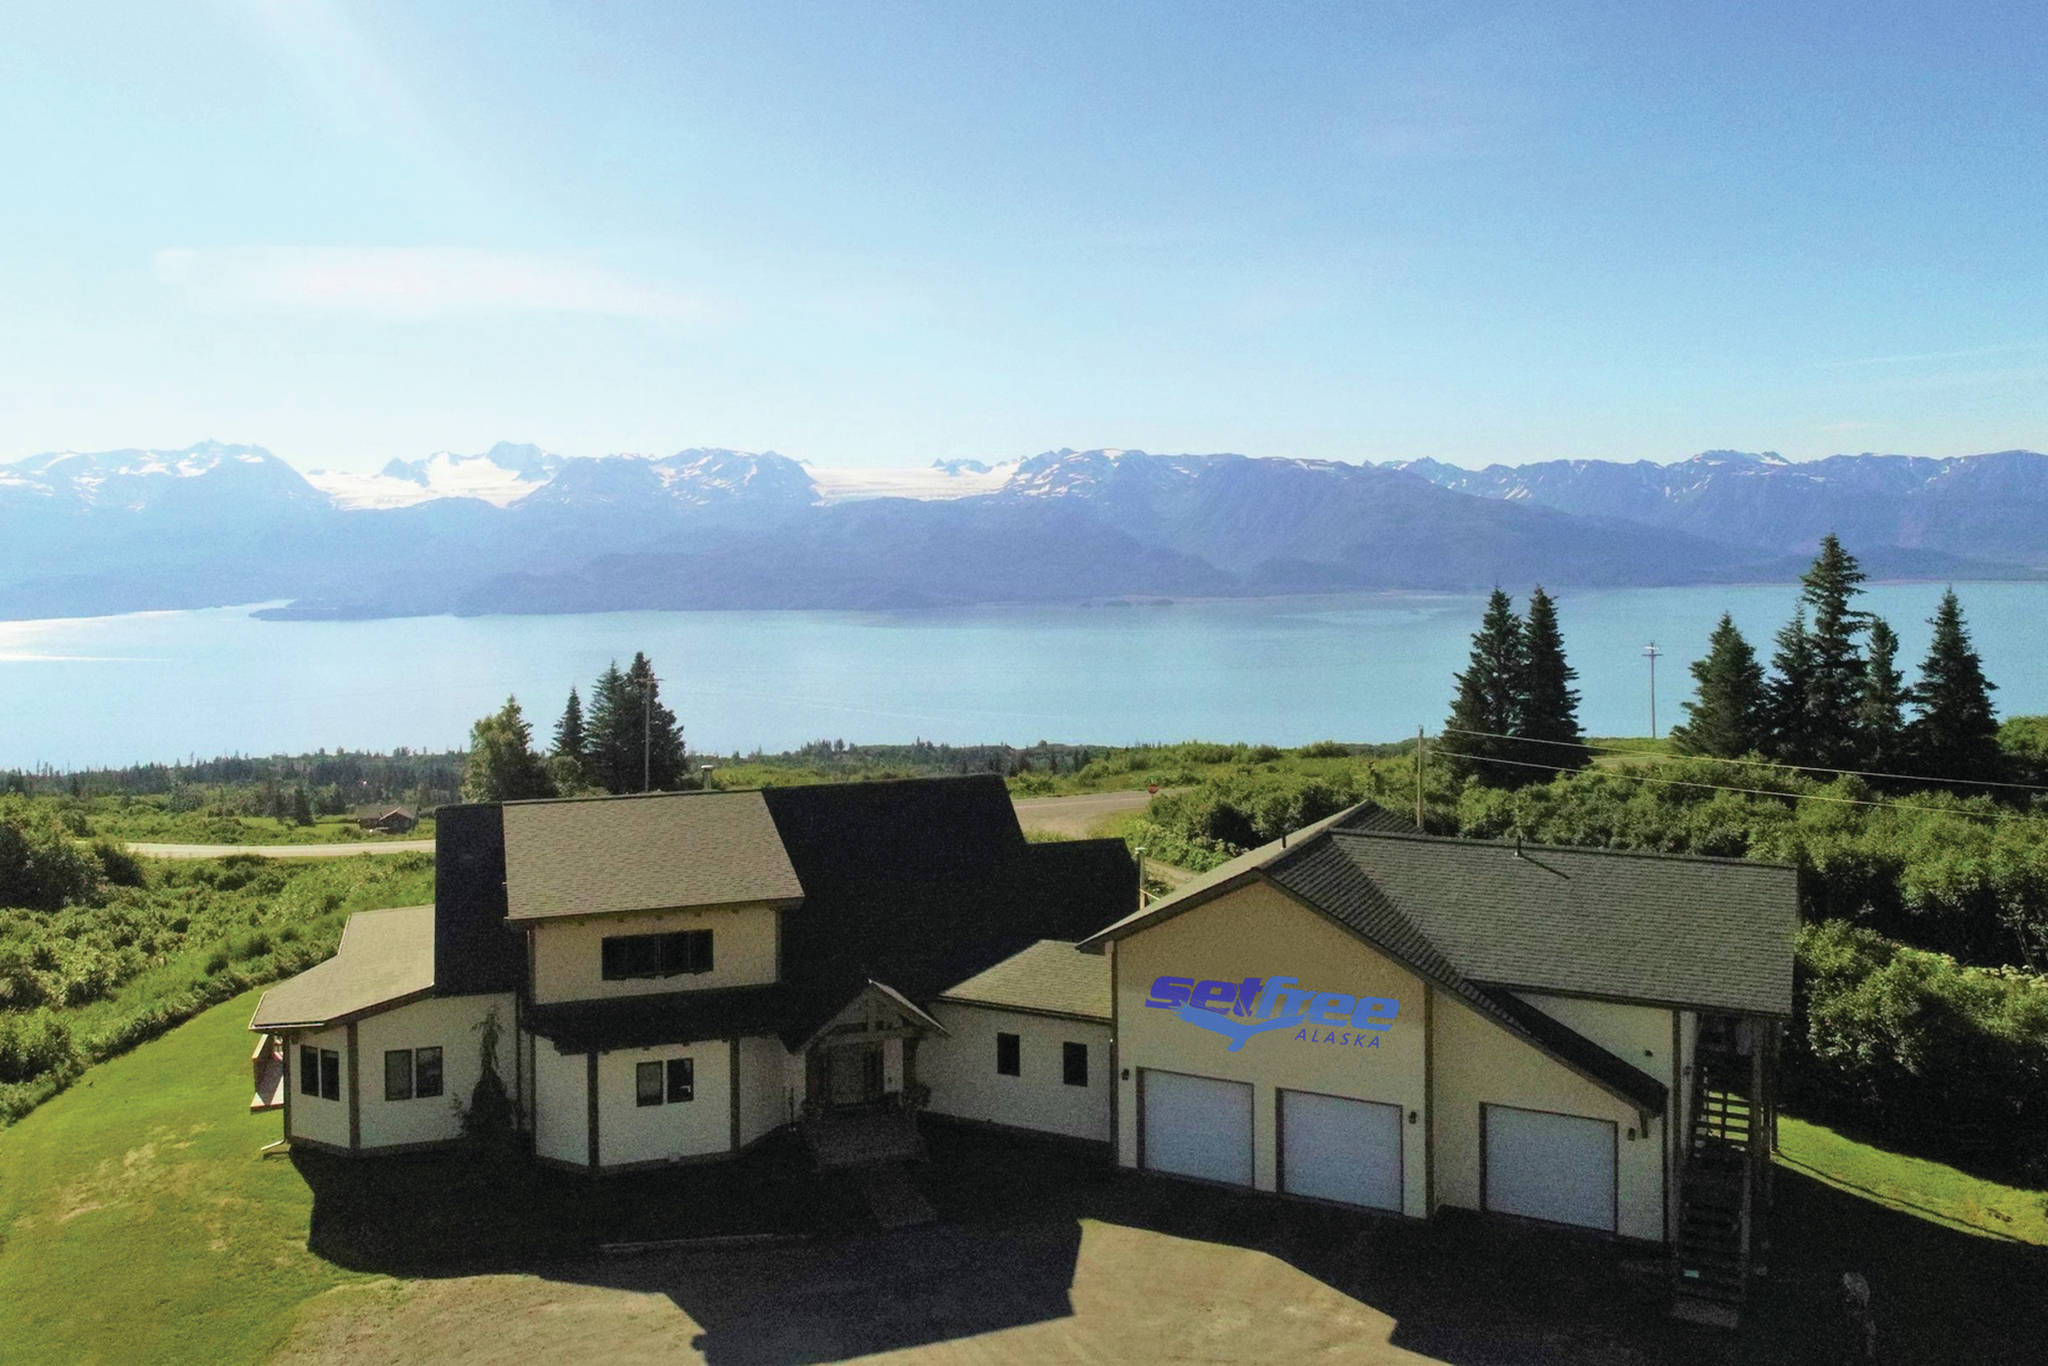 This undated photo shows the home around Mile 15 East End Road near Homer, Alaska that will serve as a new residential inpatient treatment facility for Set Free Alaska, a religions organization based in the Mat Su Valley bringing addiction treatment to the Homer area. (Photo courtesy Jessica Jones, Set Free Alaska)